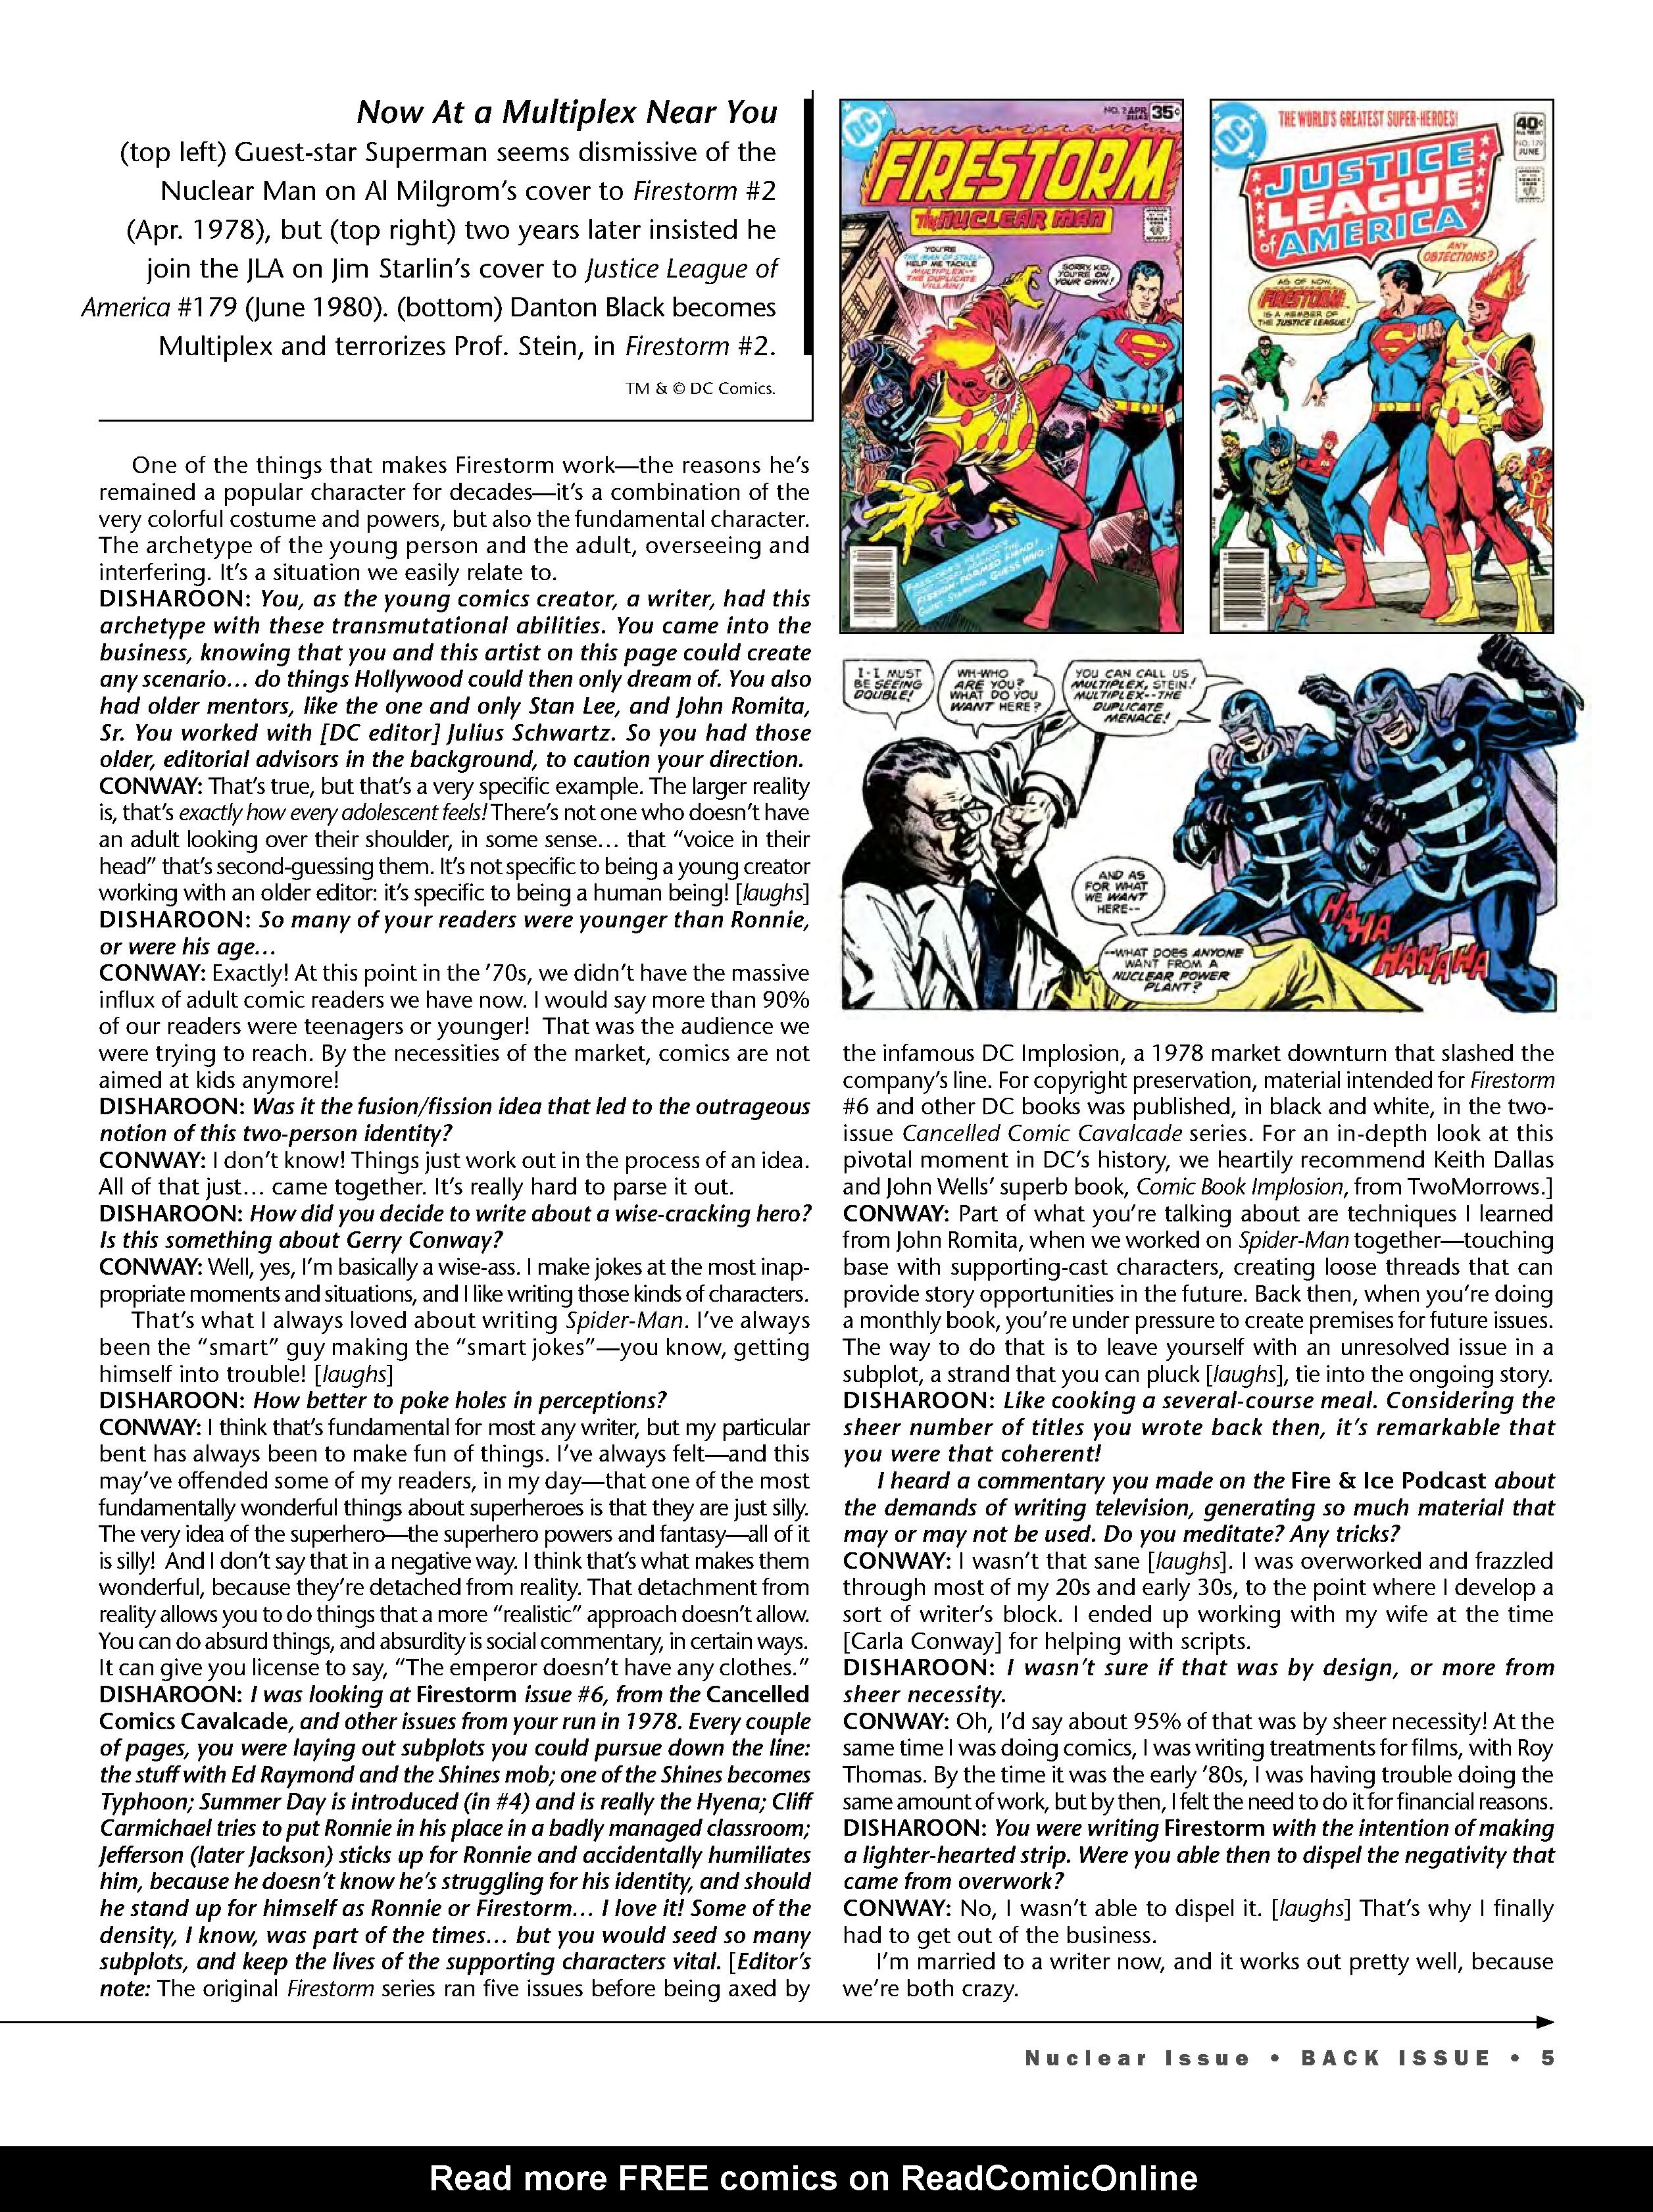 Read online Back Issue comic -  Issue #112 - 7